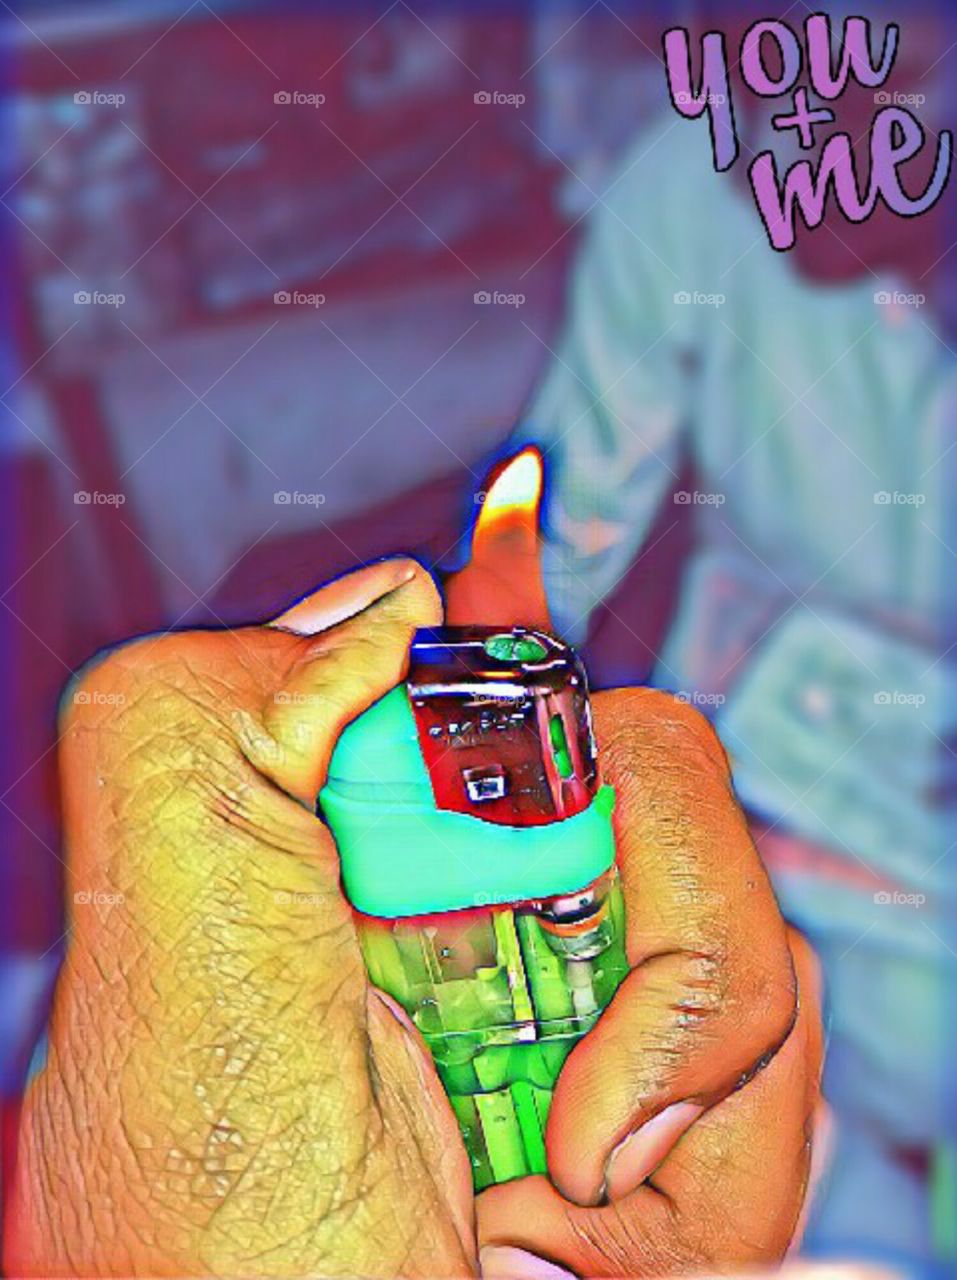 #HAND WITH LIGHTER